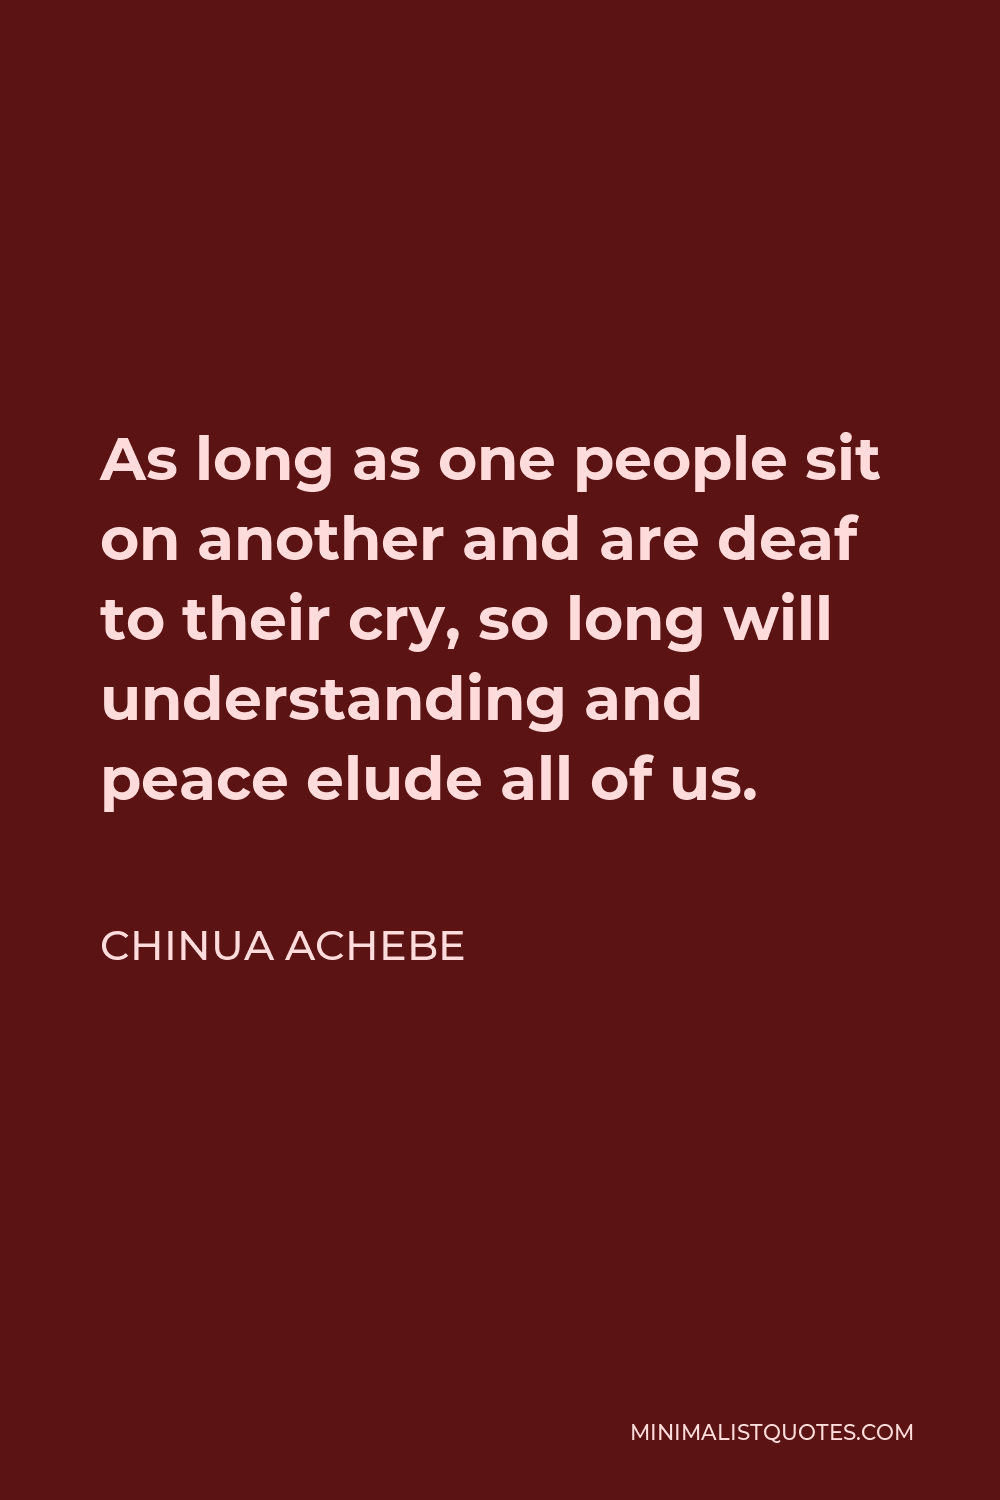 Chinua Achebe Quote - As long as one people sit on another and are deaf to their cry, so long will understanding and peace elude all of us.